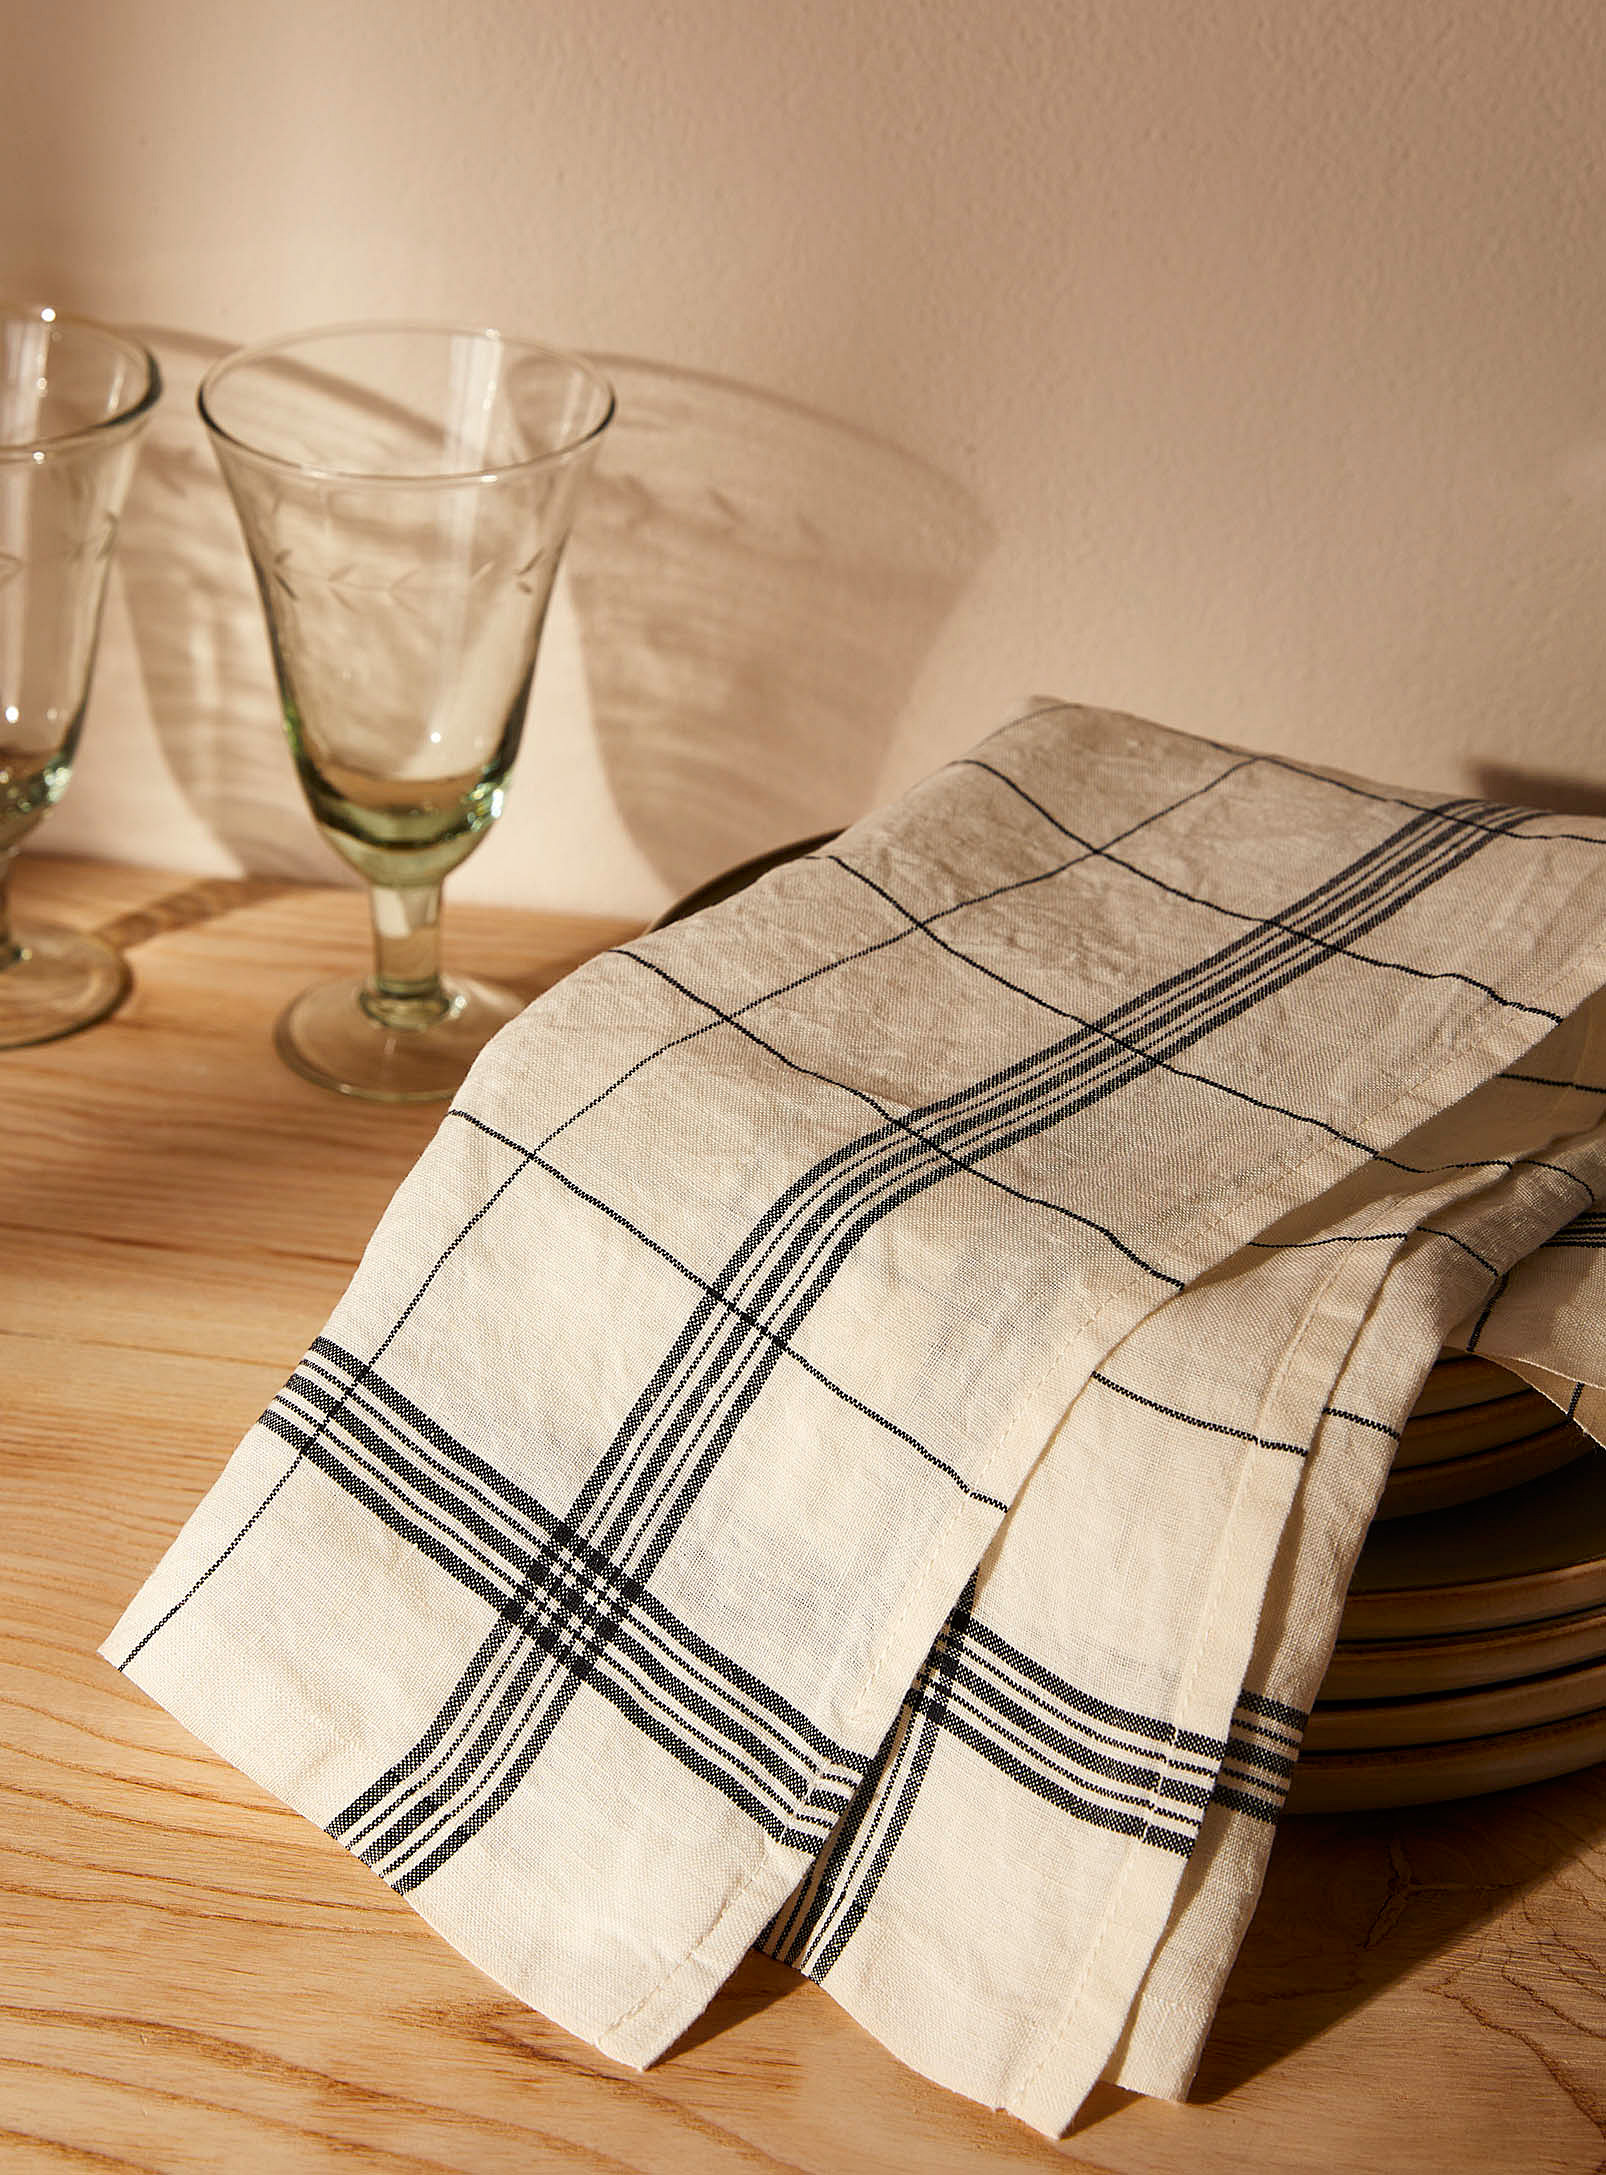 Charvet Editions Bistrot Check Pure Linen Tea Towel In Patterned Black